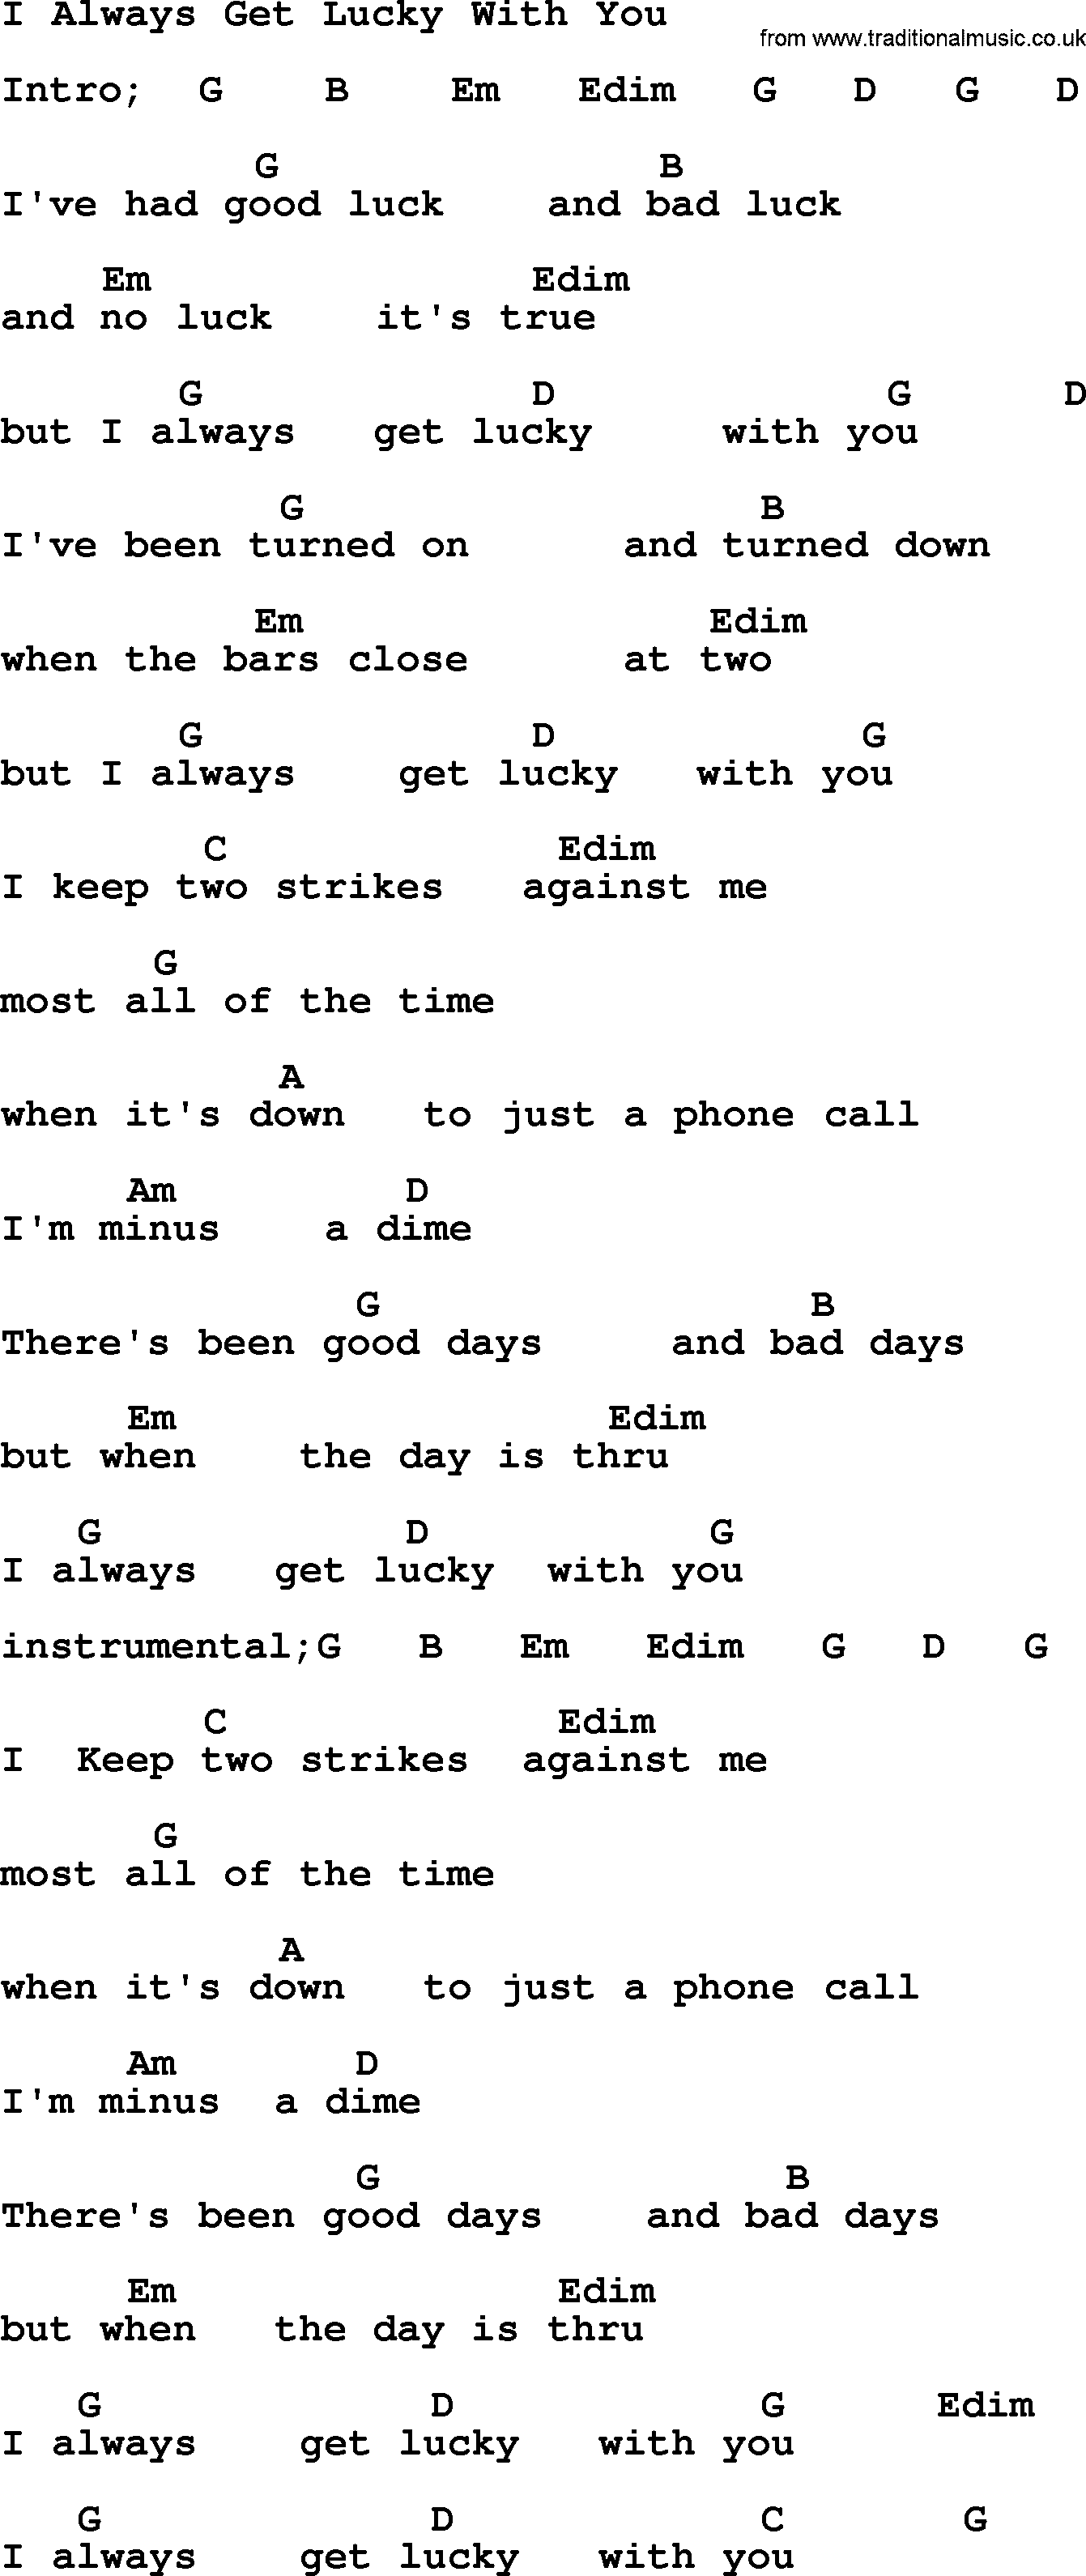 George Jones song: I Always Get Lucky With You, lyrics and chords